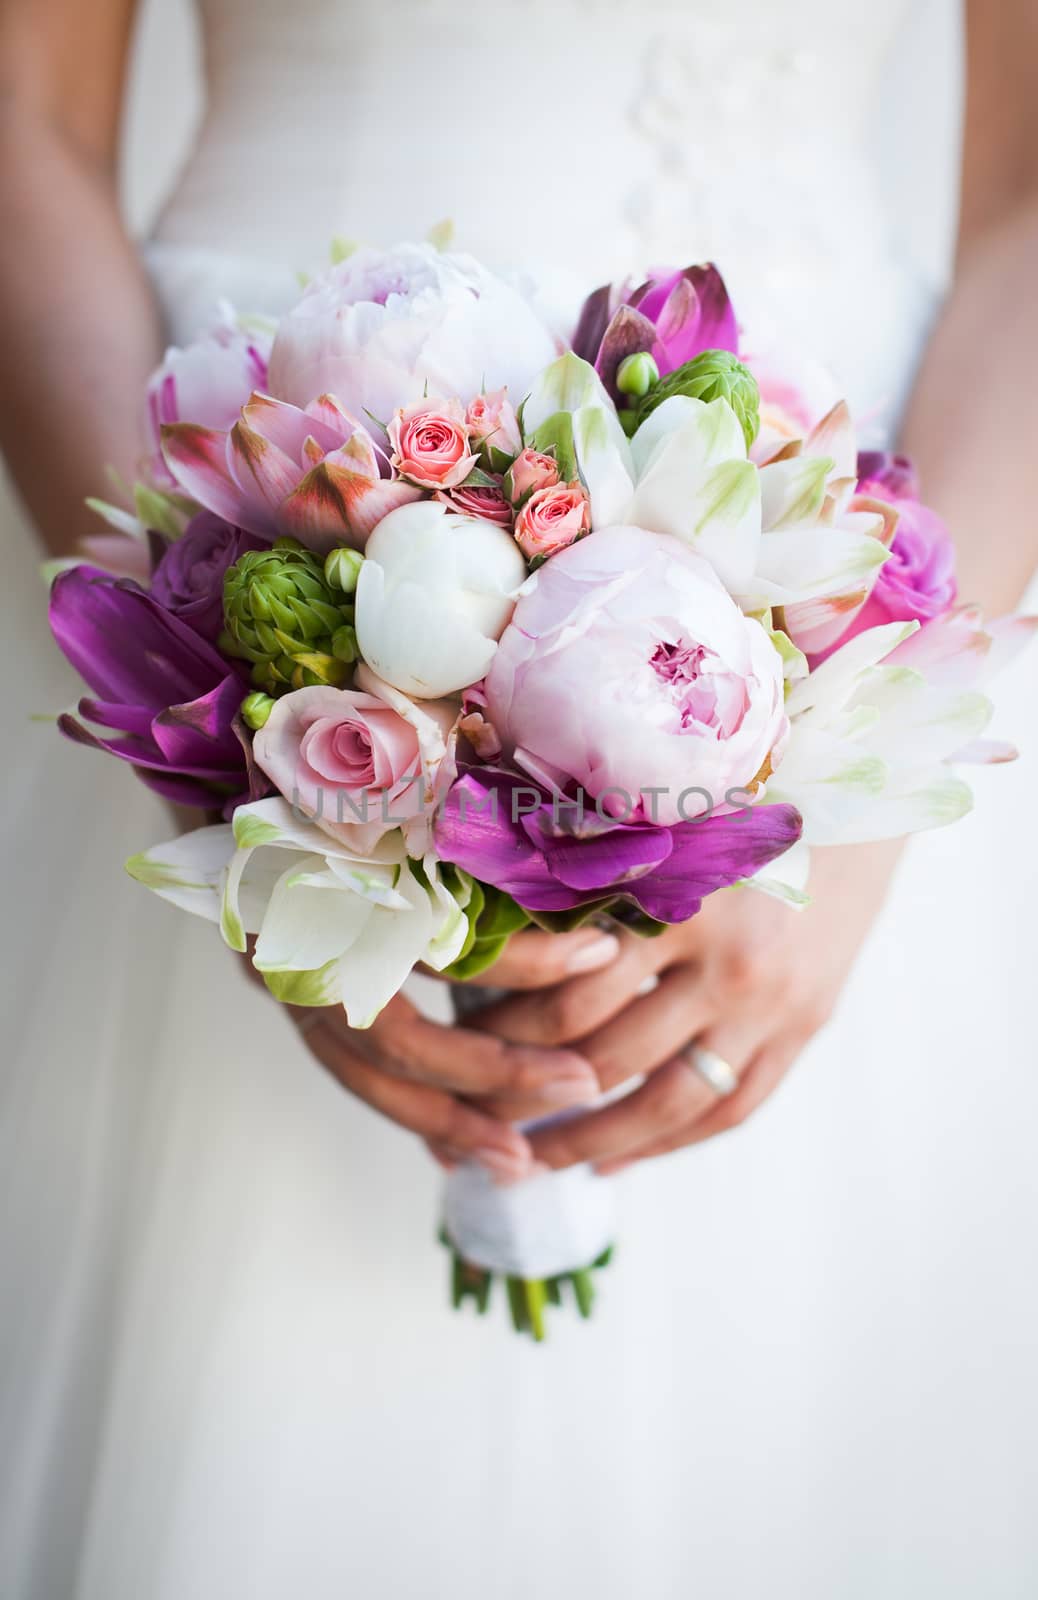 Beautiful wedding bouquet in hands of the bride by melis